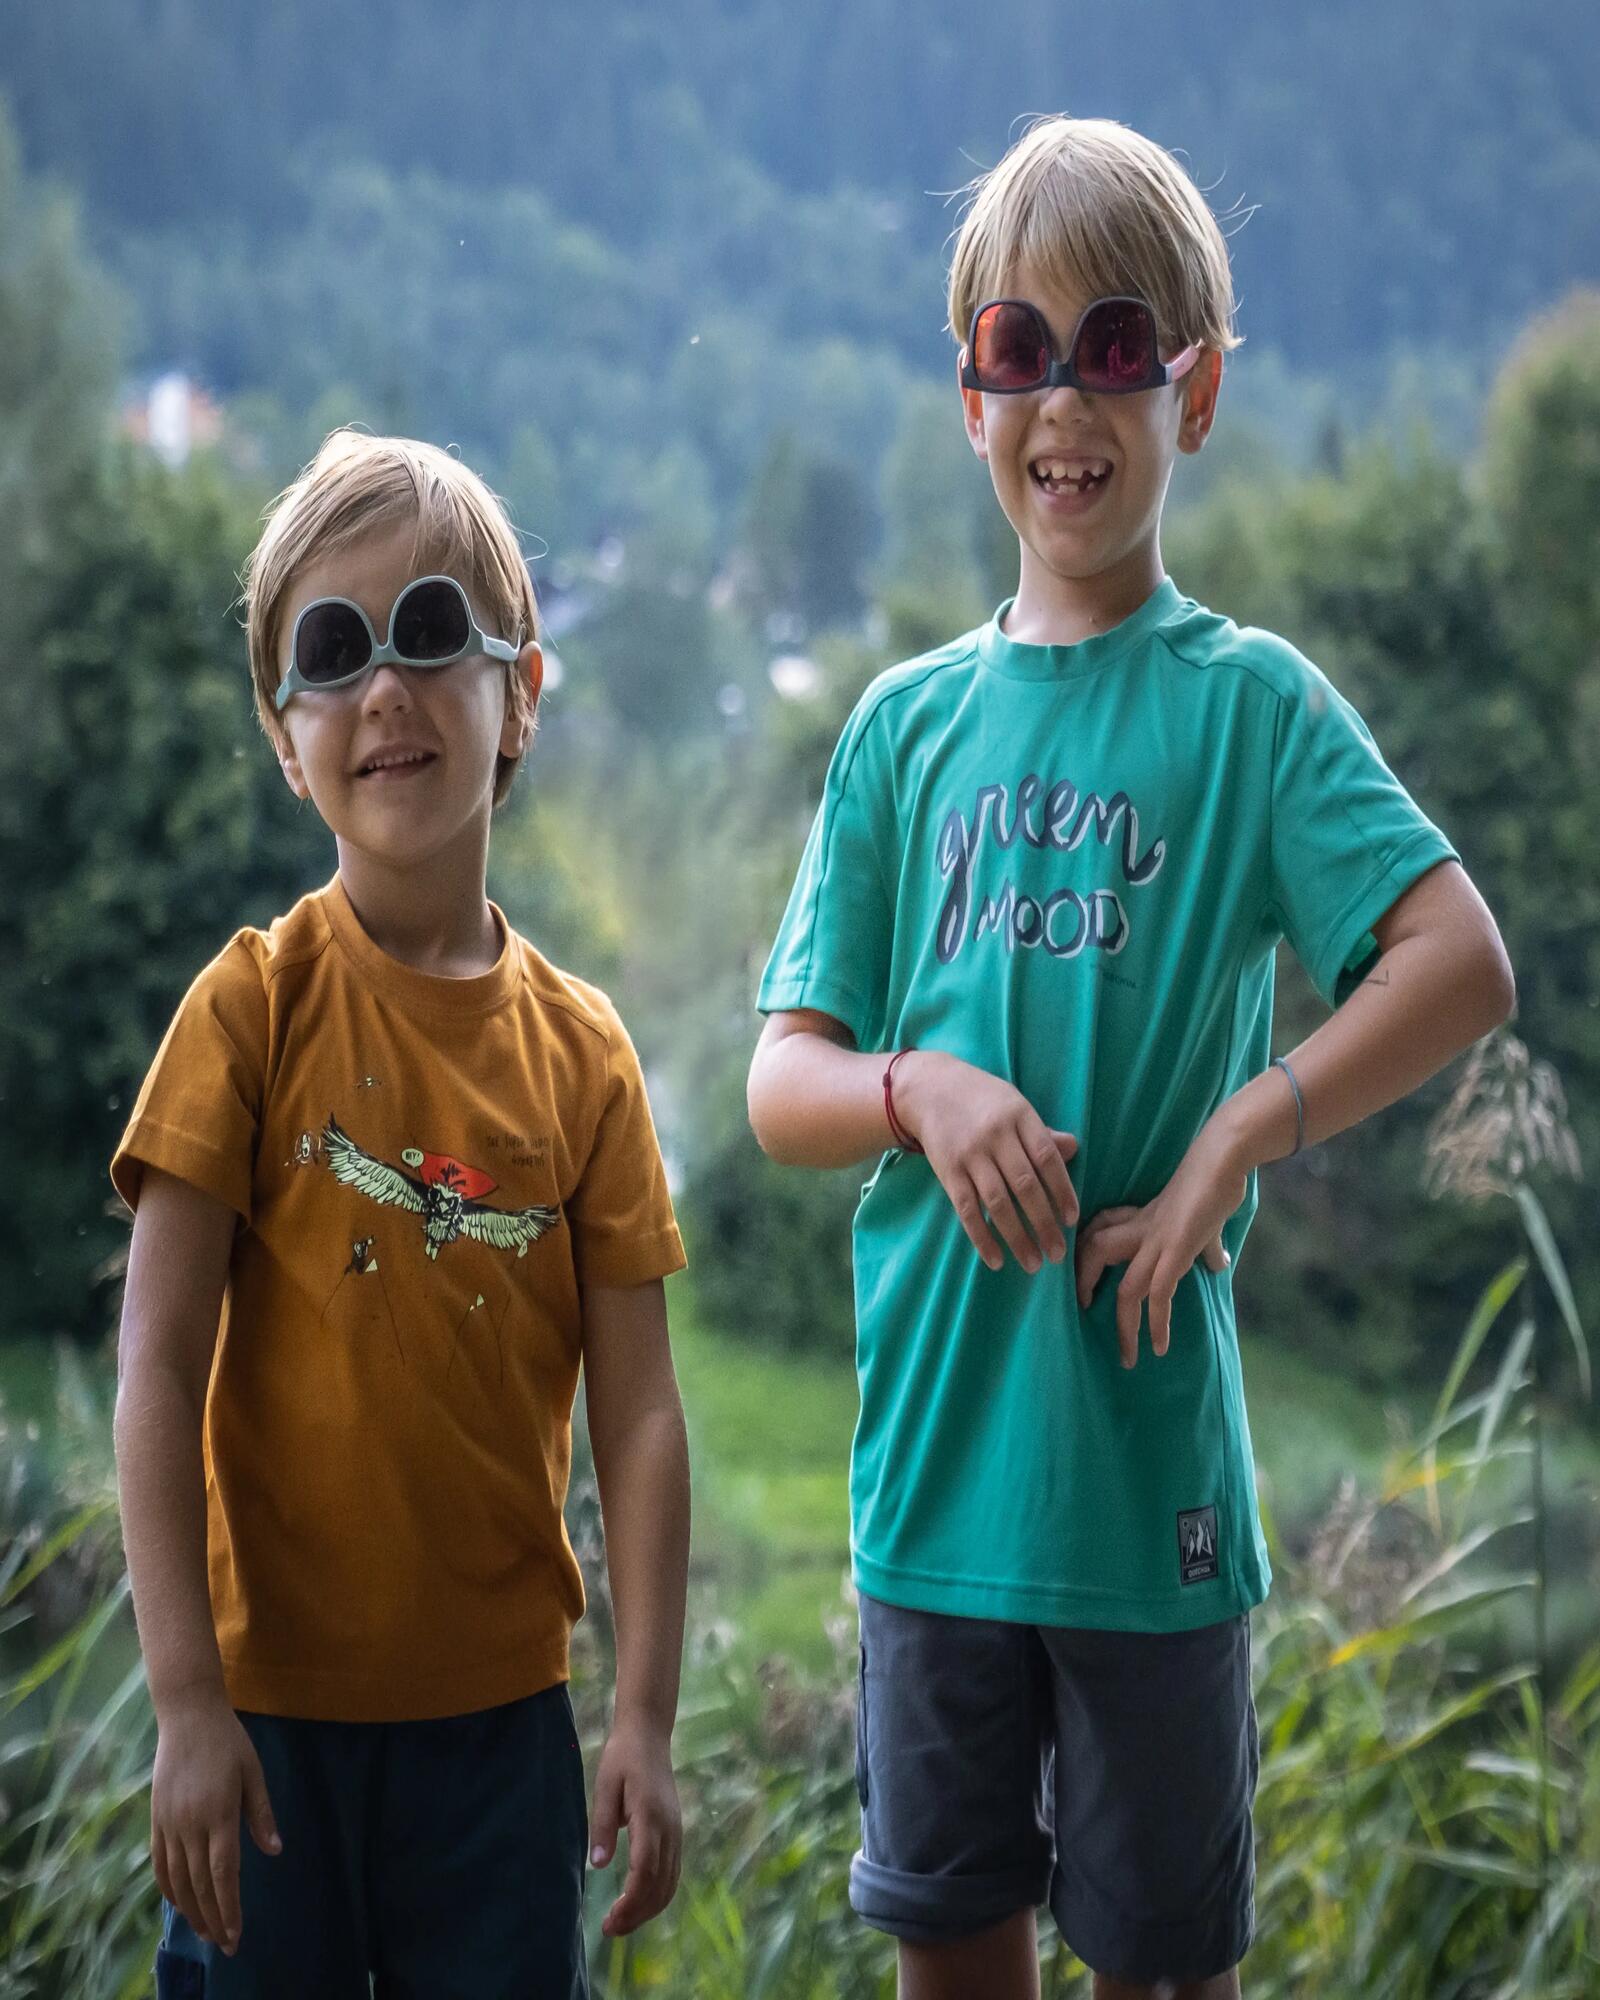 How to choose sunglasses for my child?